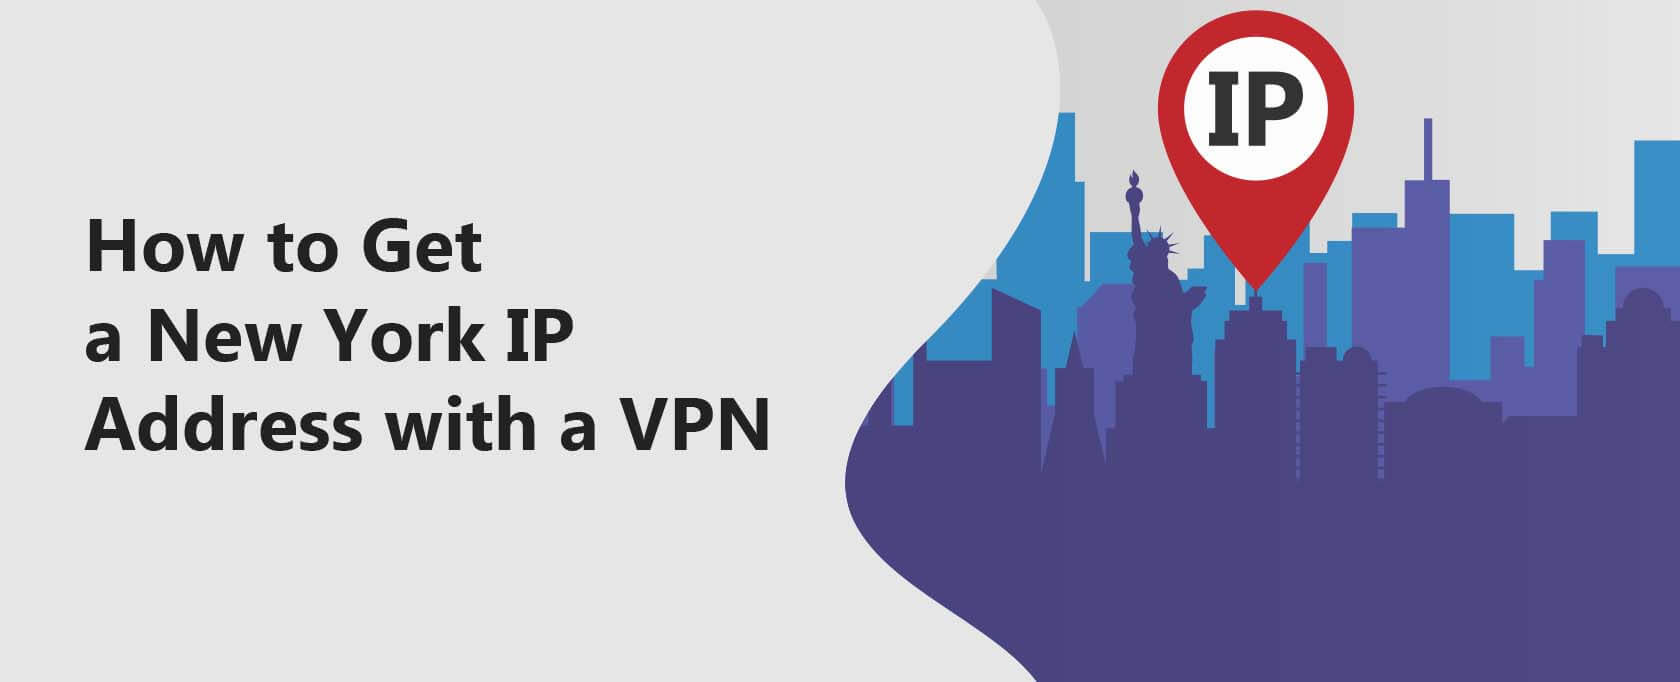 How to get a New York IP Addres - New York VPN